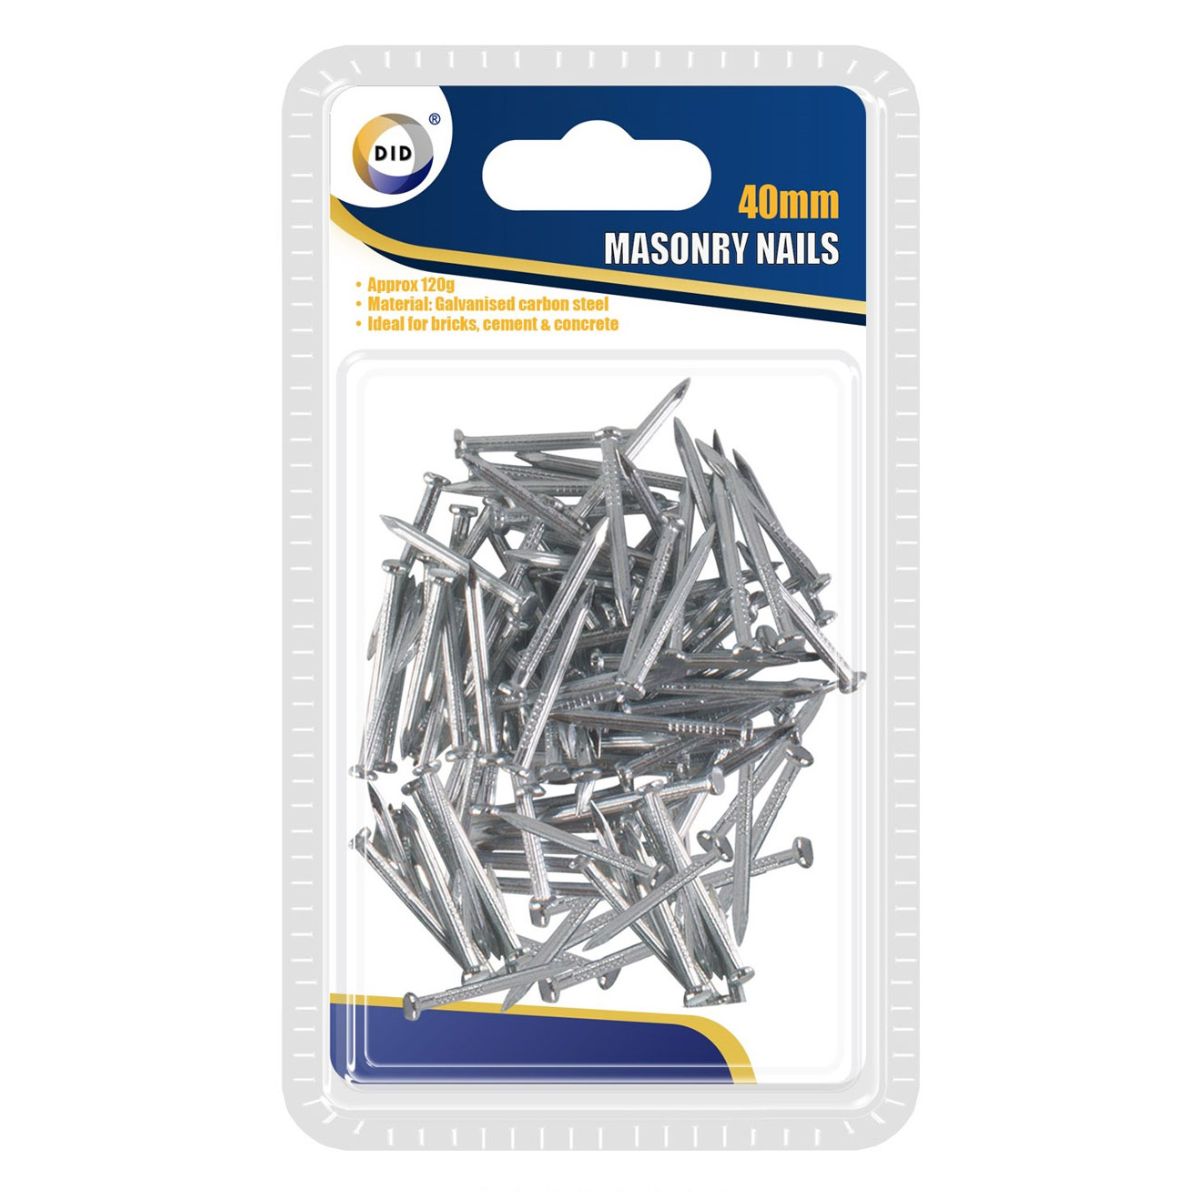 Packaging of DID - 40mm Masonry Nails, approximately 100 pieces, designed for use on brick, concrete and stone, displayed in a clear plastic blister pack.